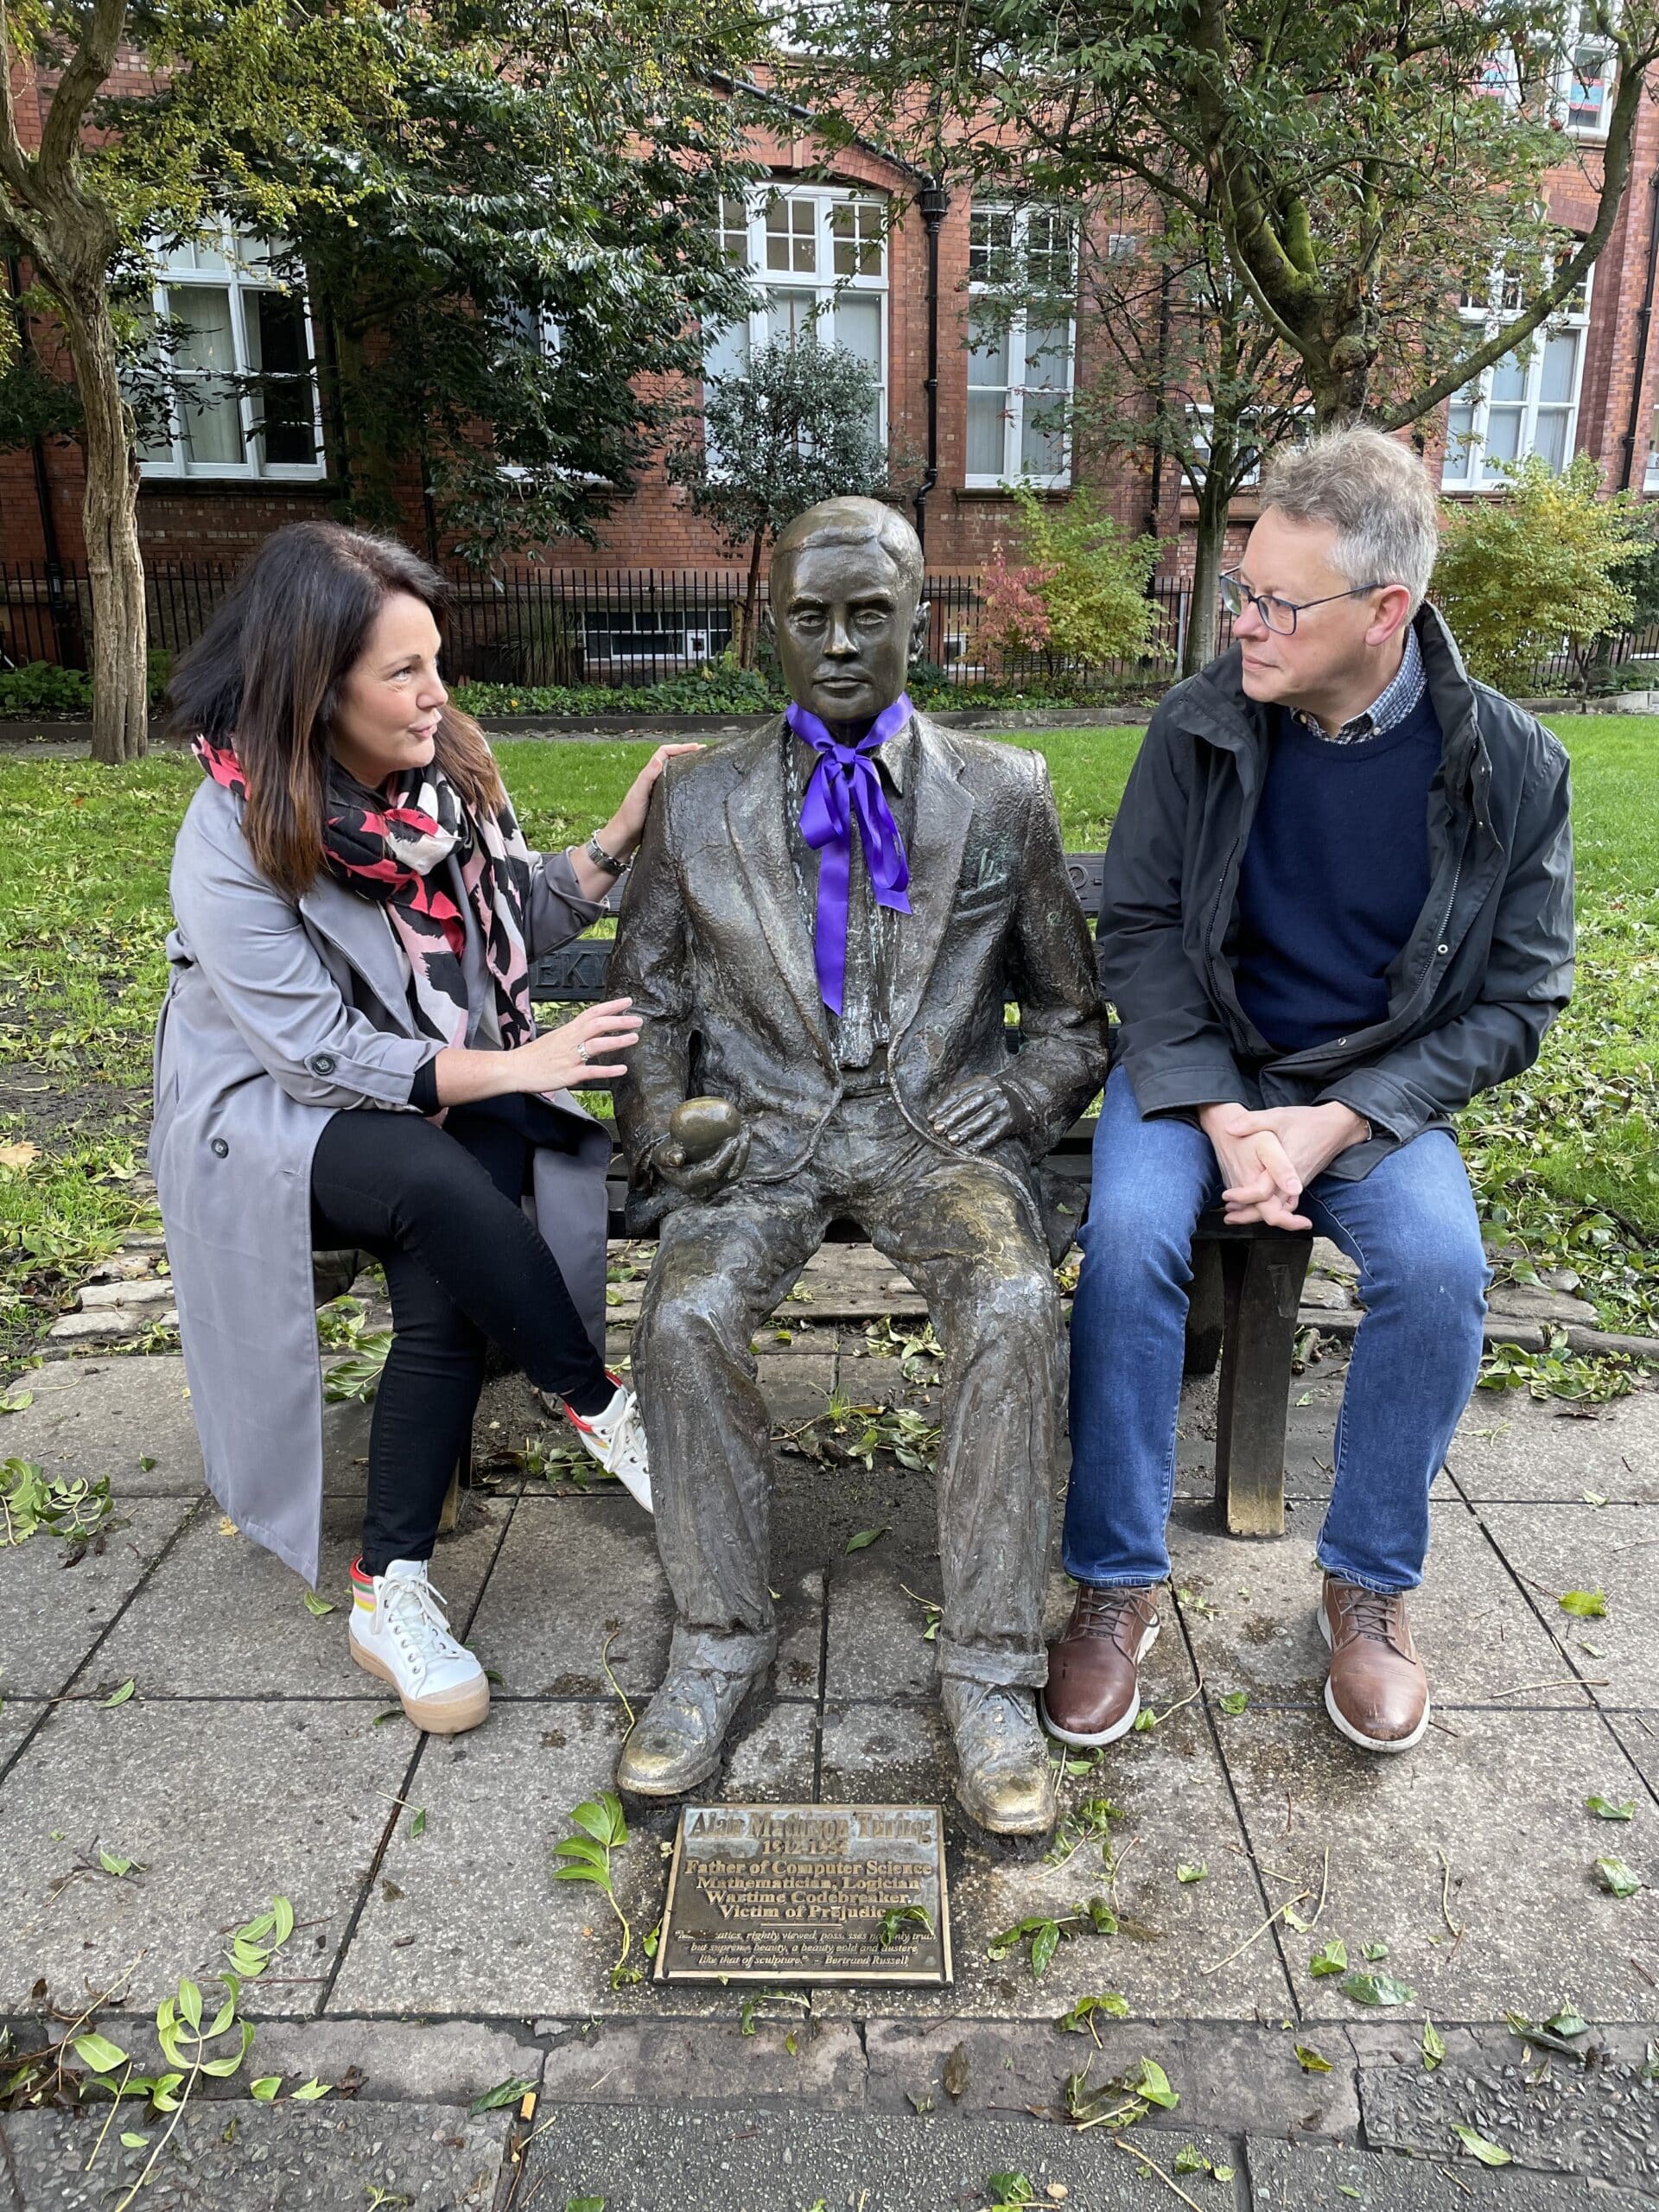 Karen Milligan and Dermot Turing with the Alan Turing statue in Manchester's Sackville Gardens